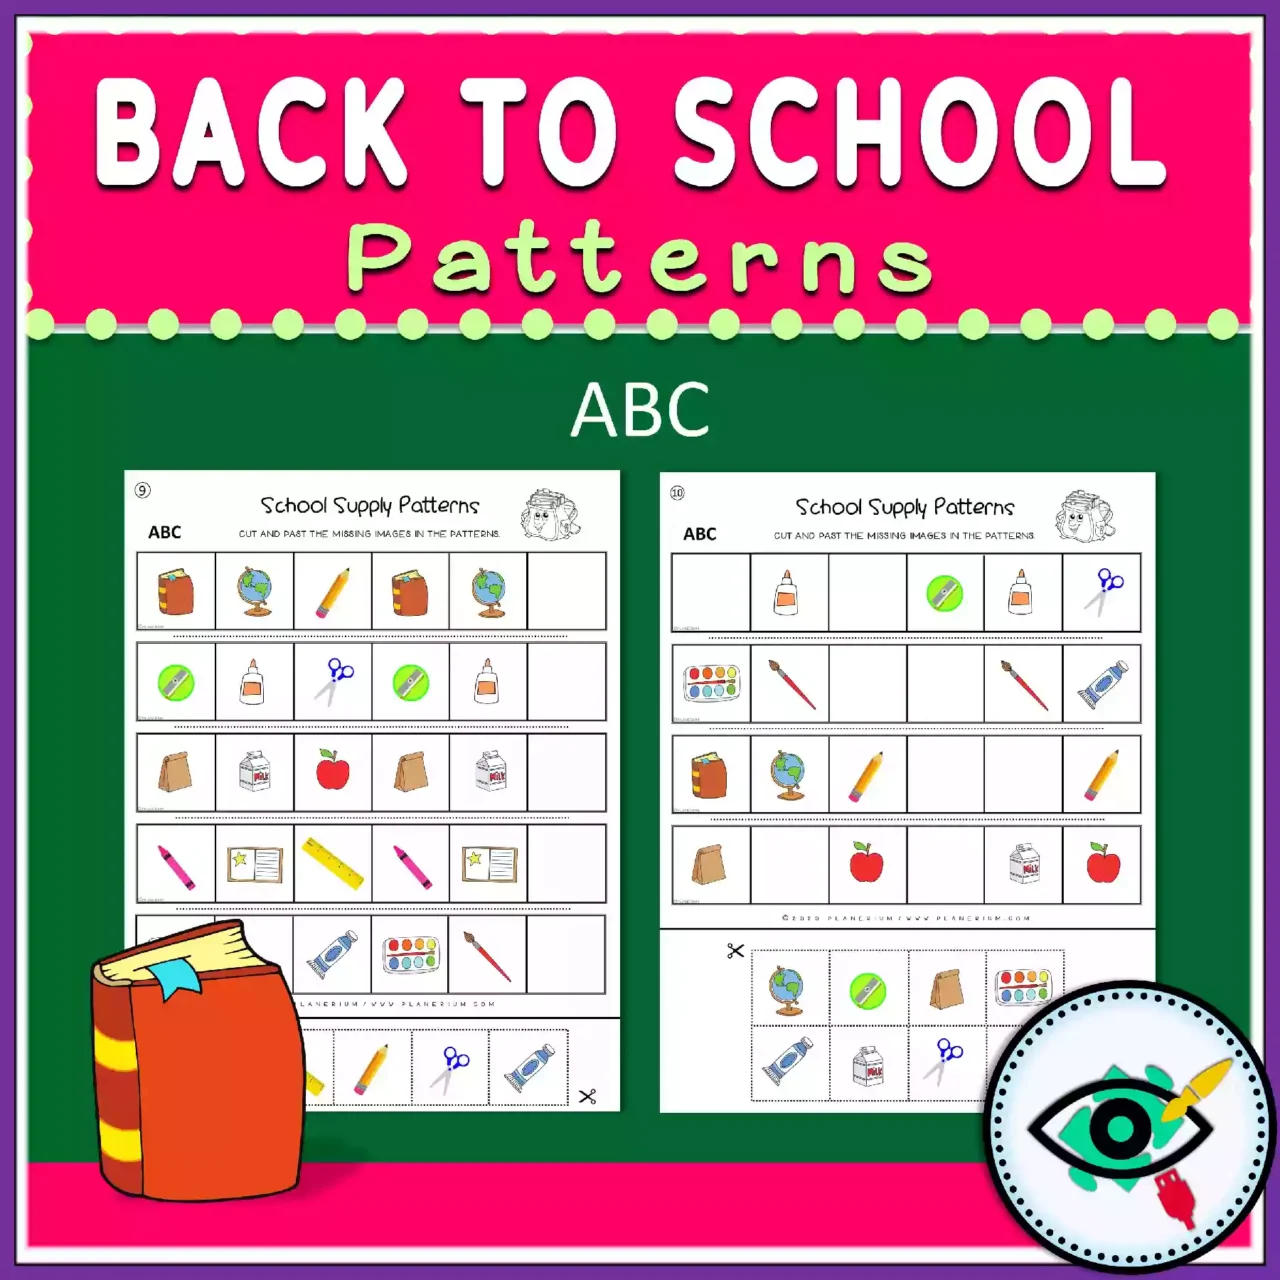 Back to School Patterns - Featured 6